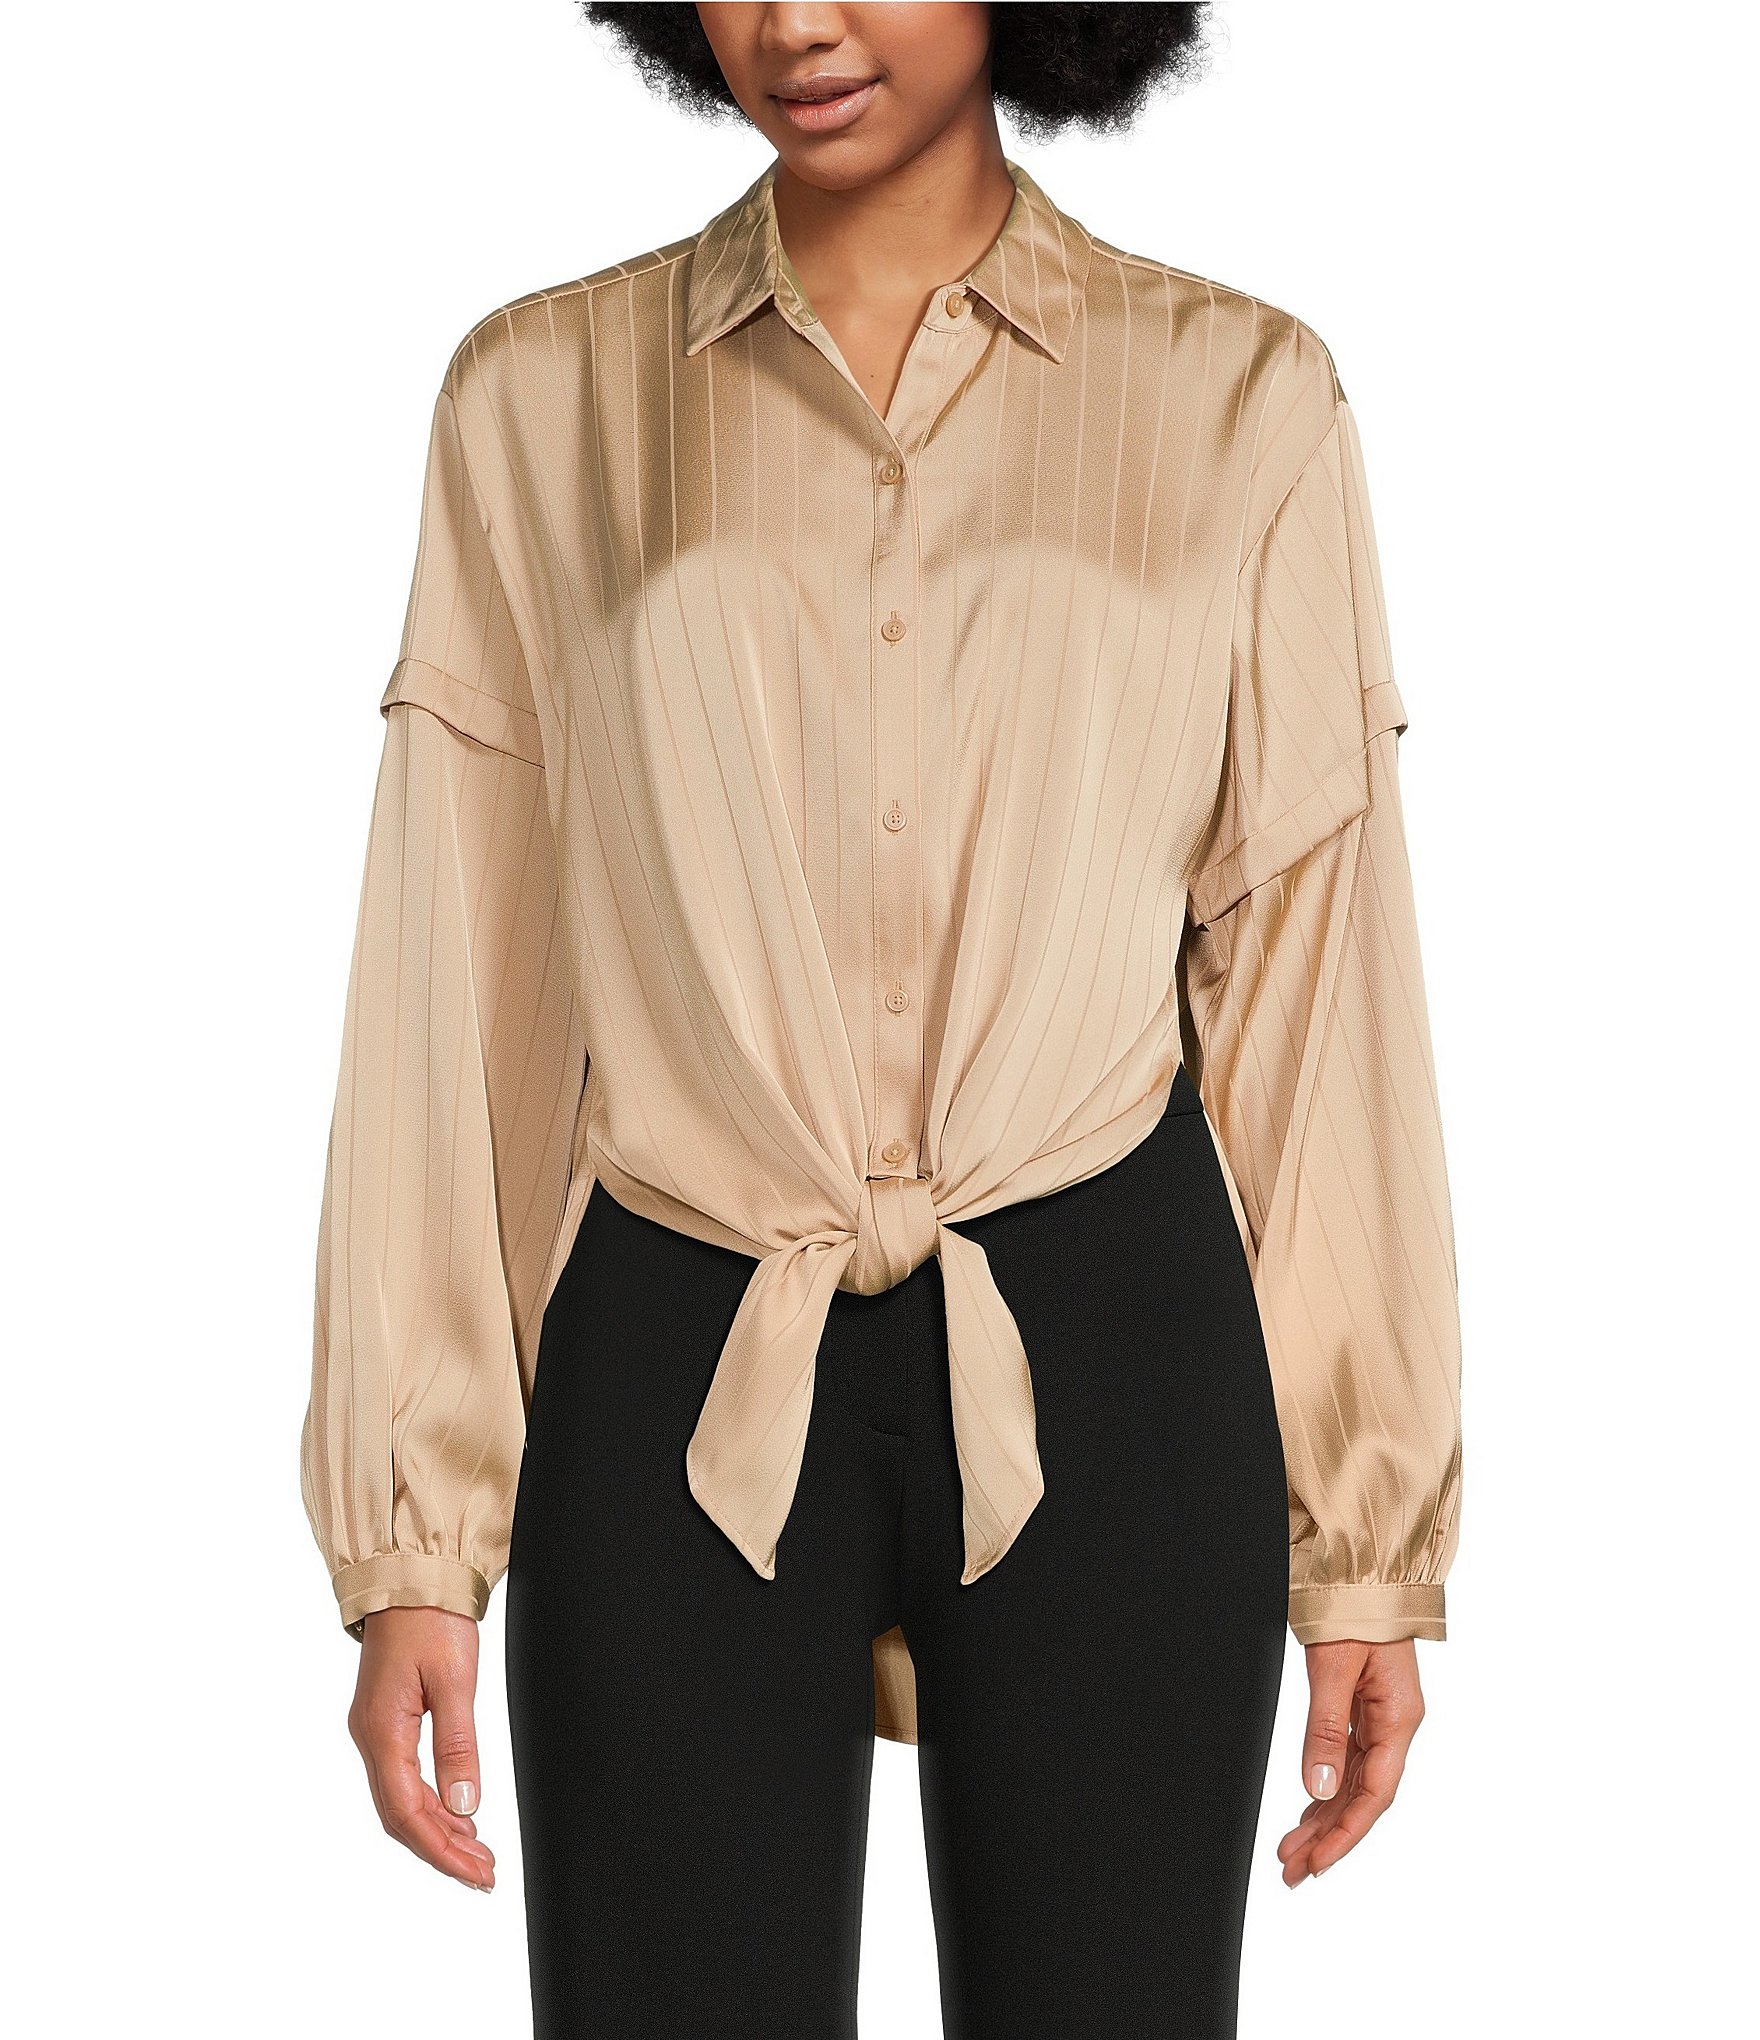 DKNY Jacquard Point Collar Long Sleeve Tie Front Blouse